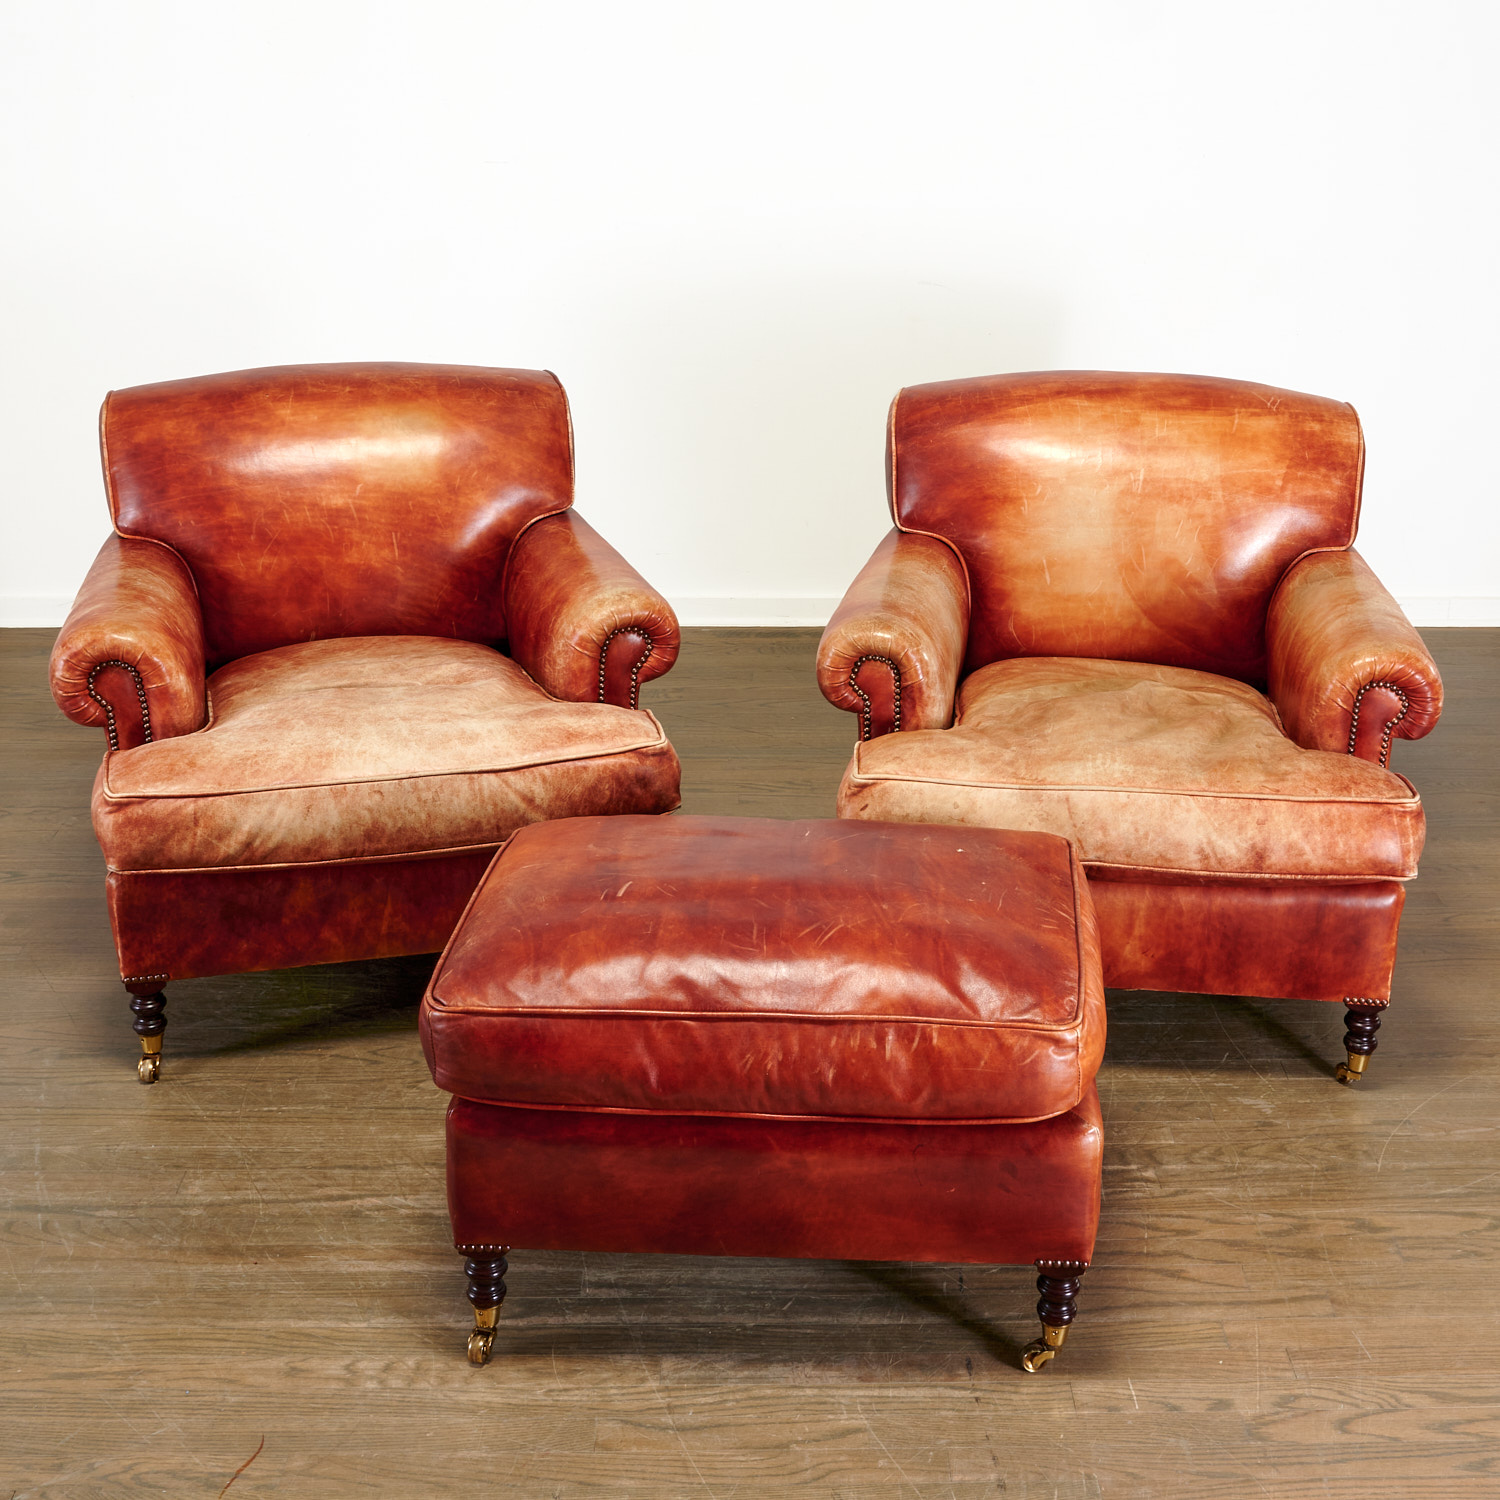 PAIR GEORGE SMITH LEATHER CLUB